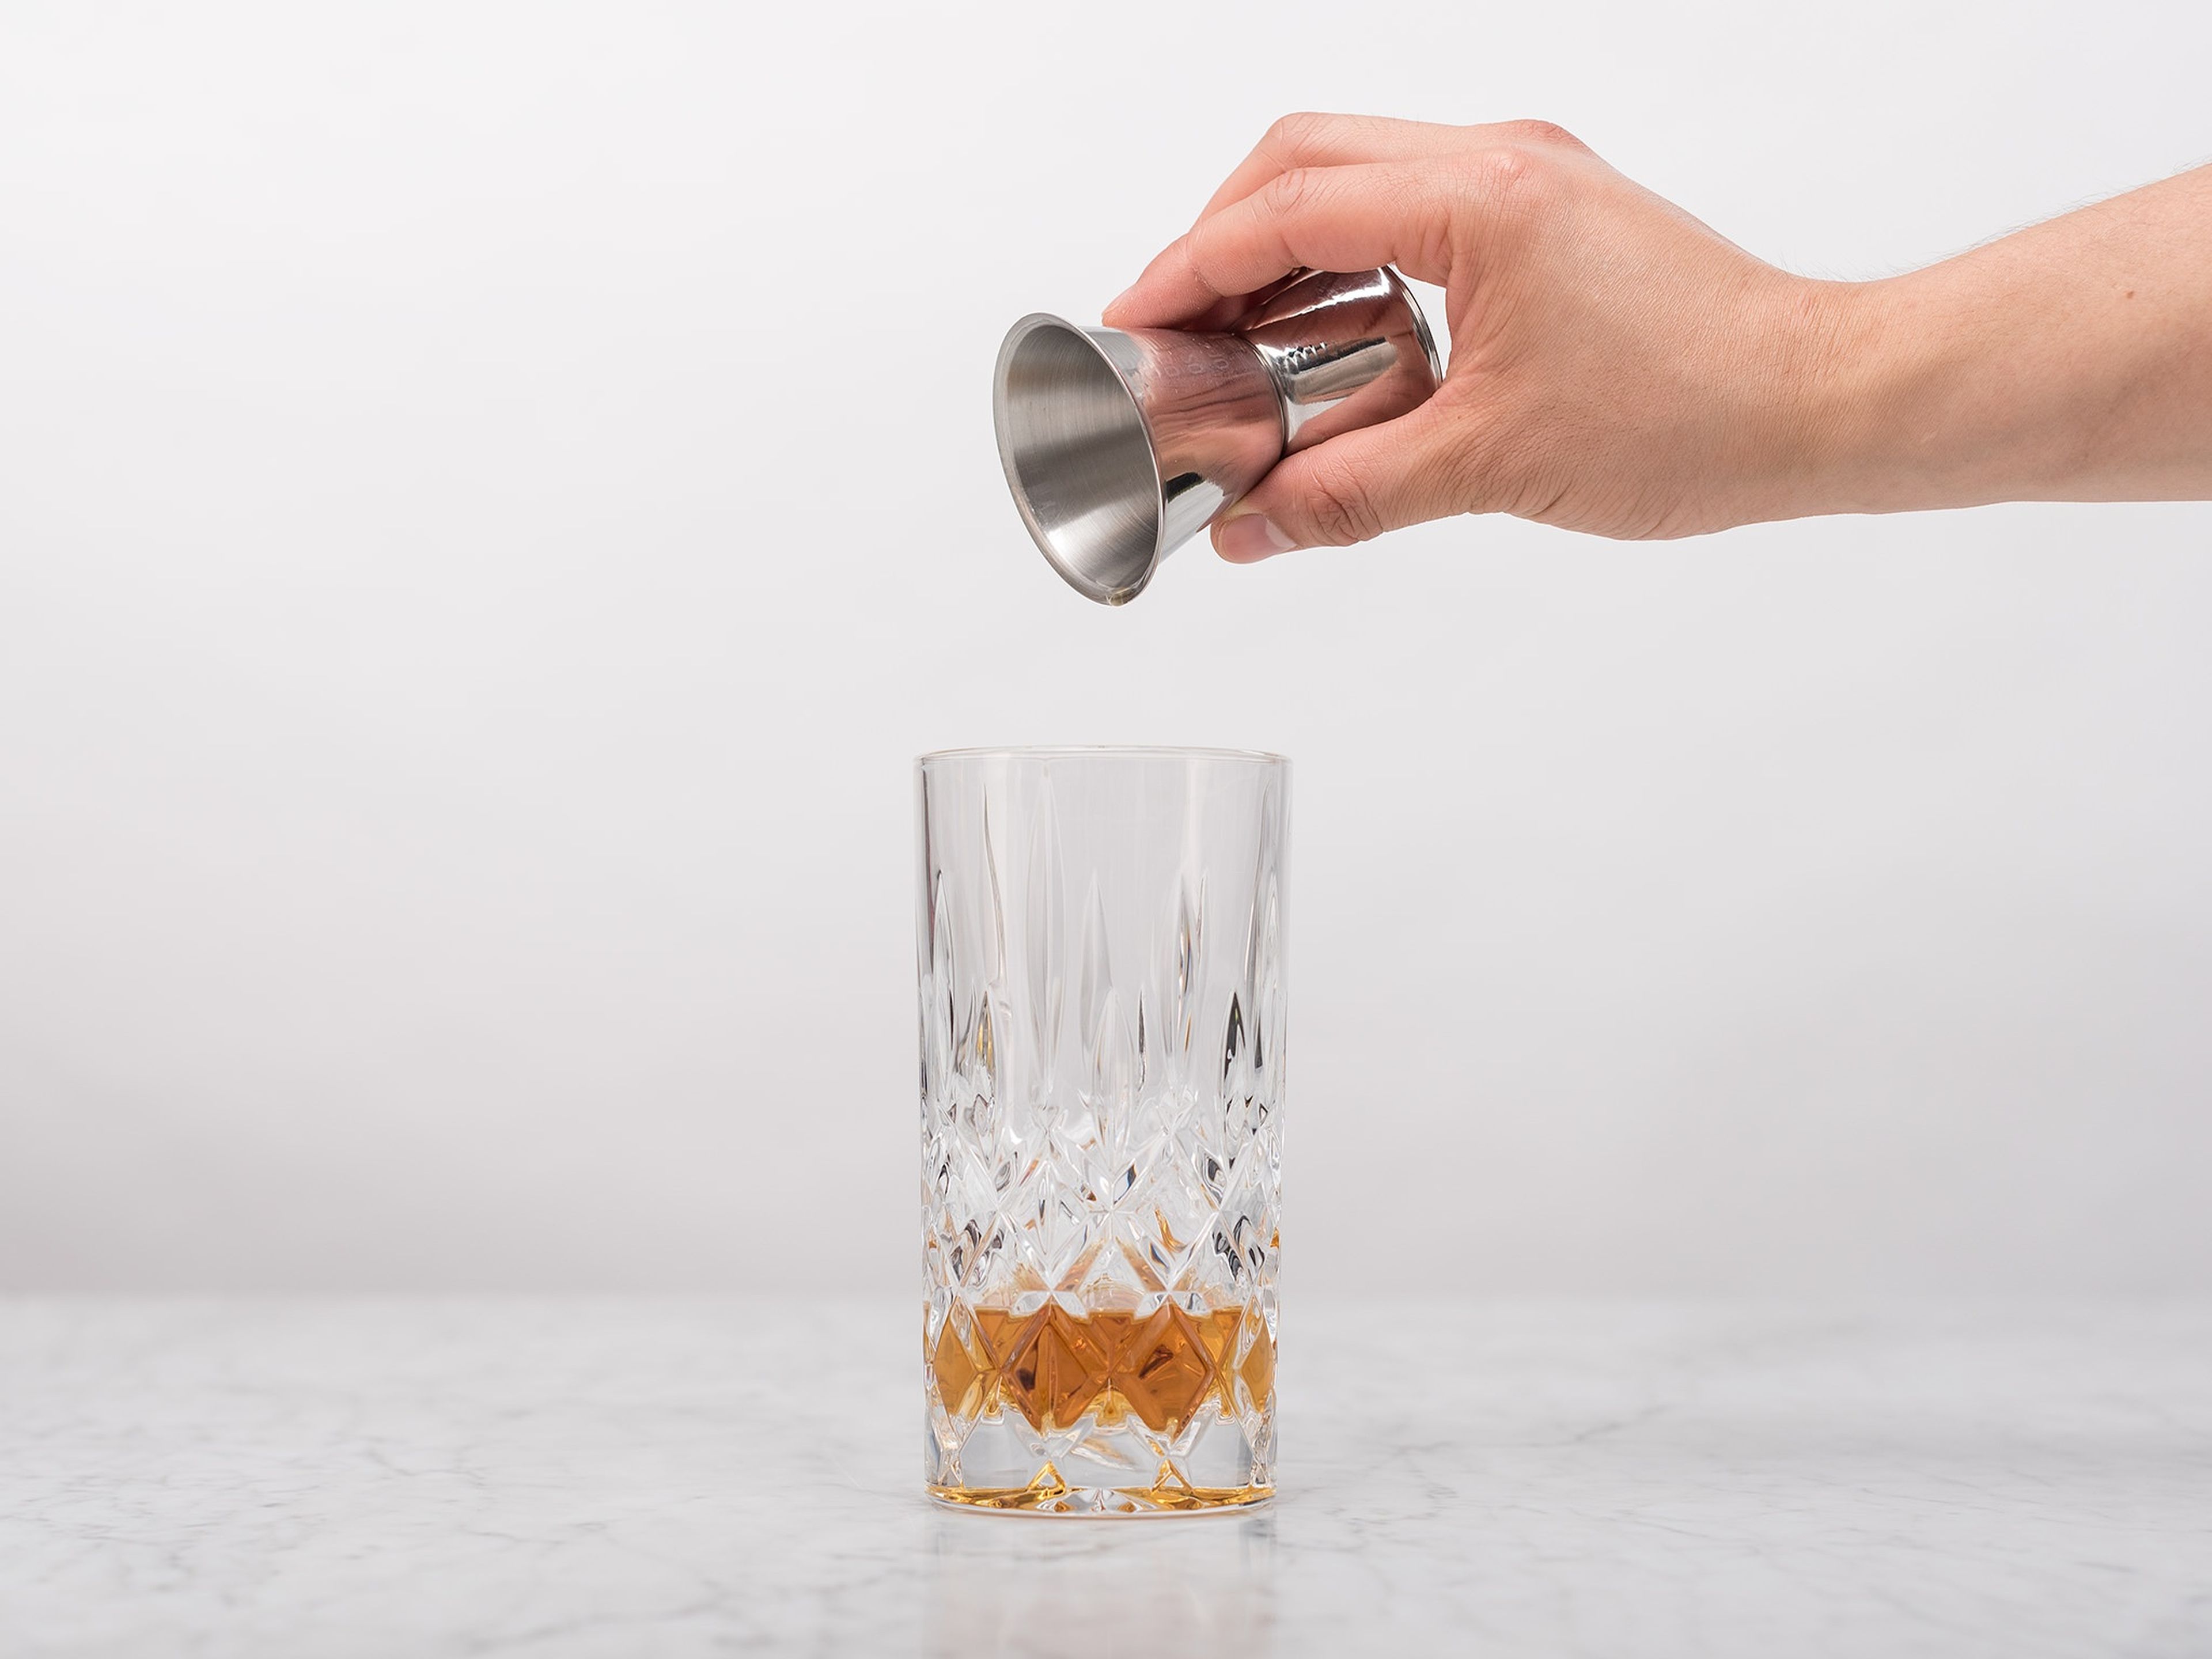 Pour whiskey into a highball glass.